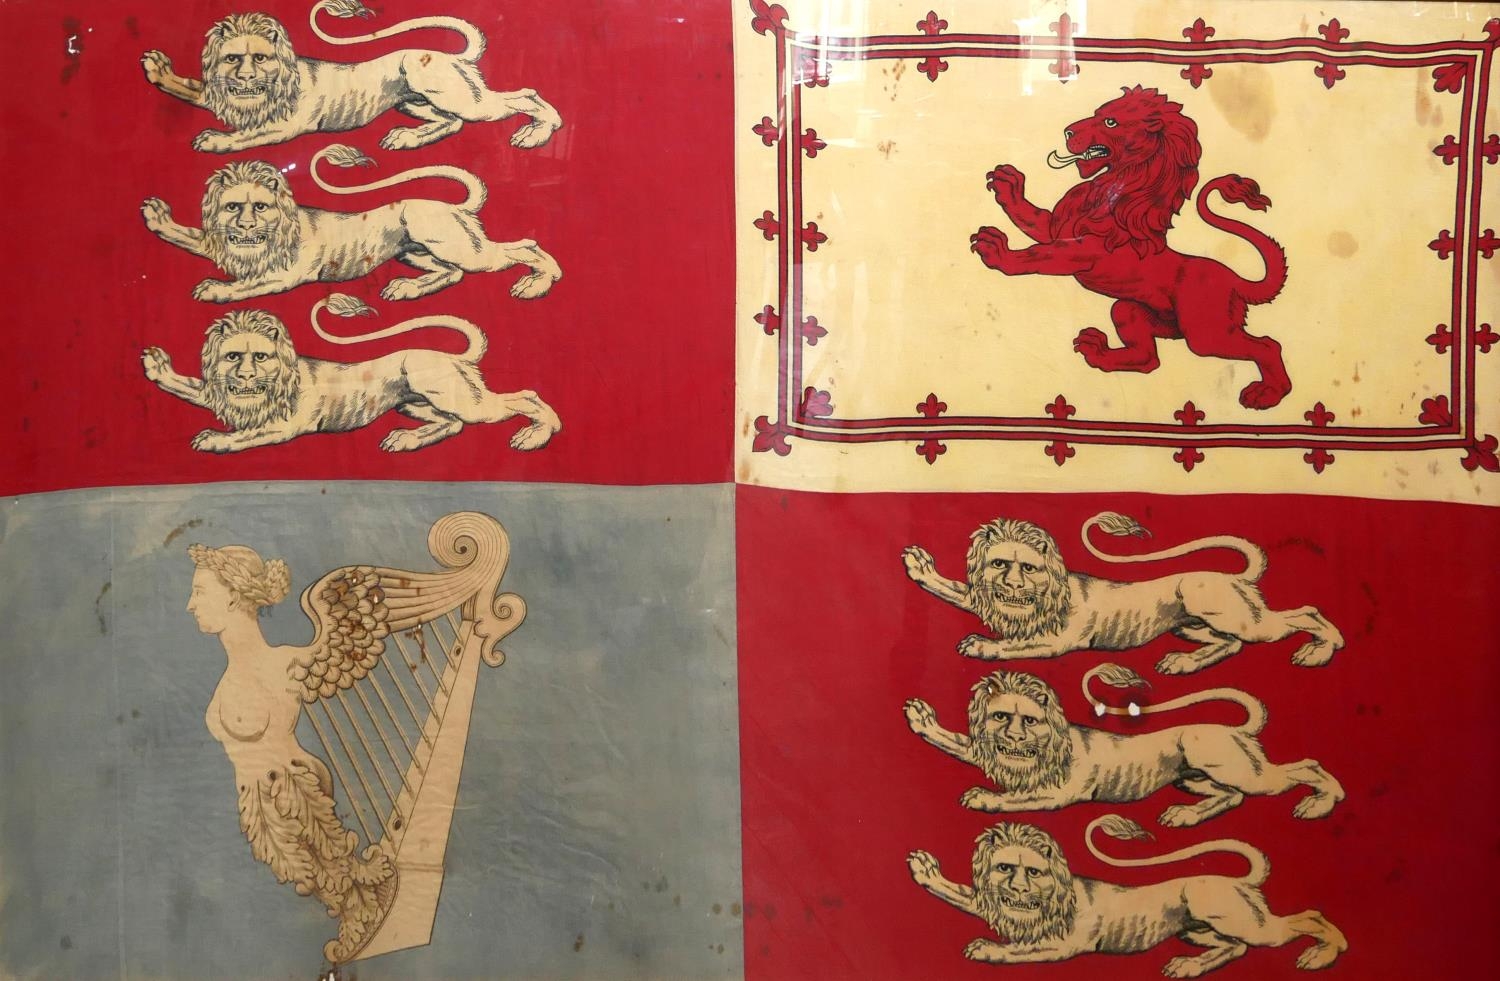 AN 18TH CENTURY ENGLISH IMPERIAL NATIONAL FLAG PAINTED ON COTTON With symbolic three English lions